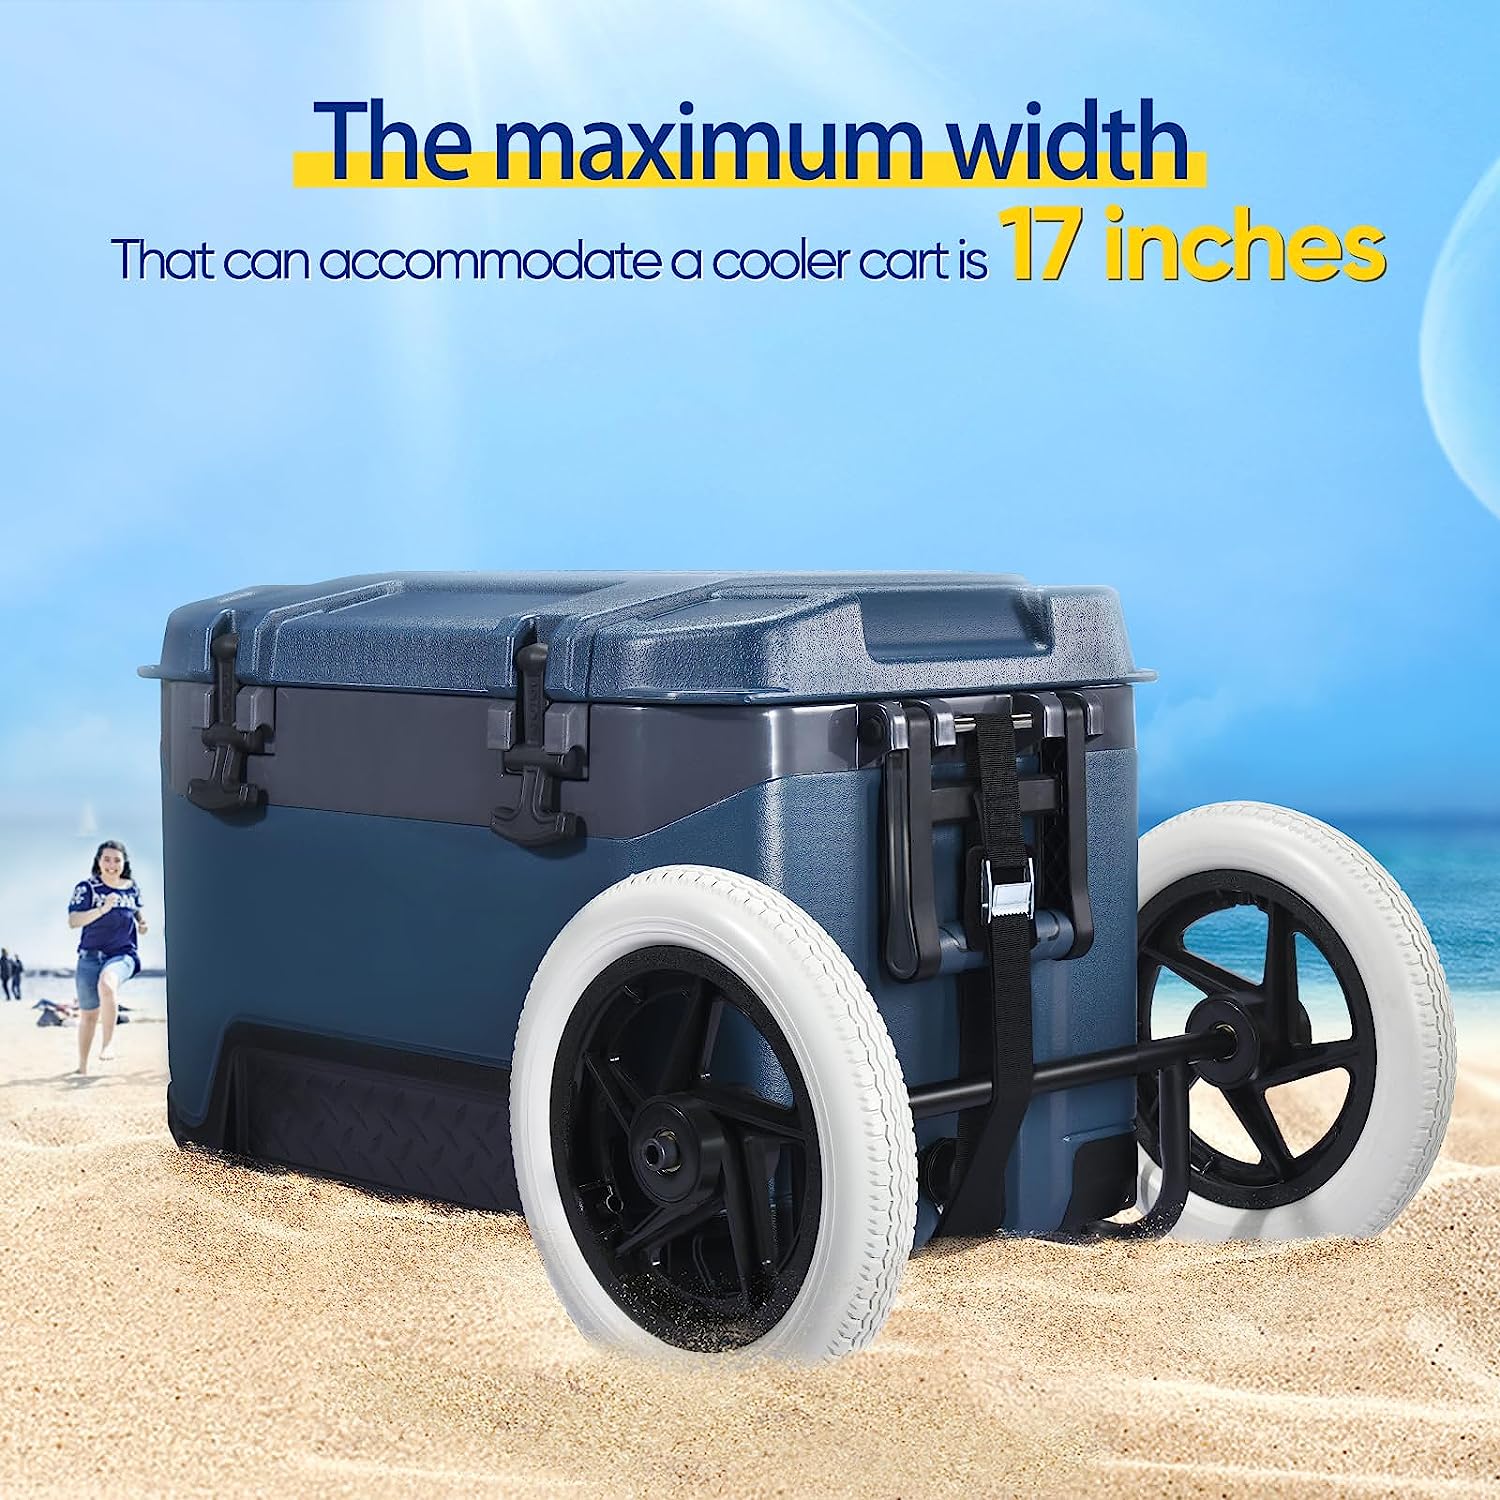 Cooler Cart Kit, Cooler Wheel Kit Includes 12-Inch Cooler Wheels, Universal Heavy Duty Wheels for Cooler Camping Cooler Accessories for Camping & Beach, 17 Inches Coolers